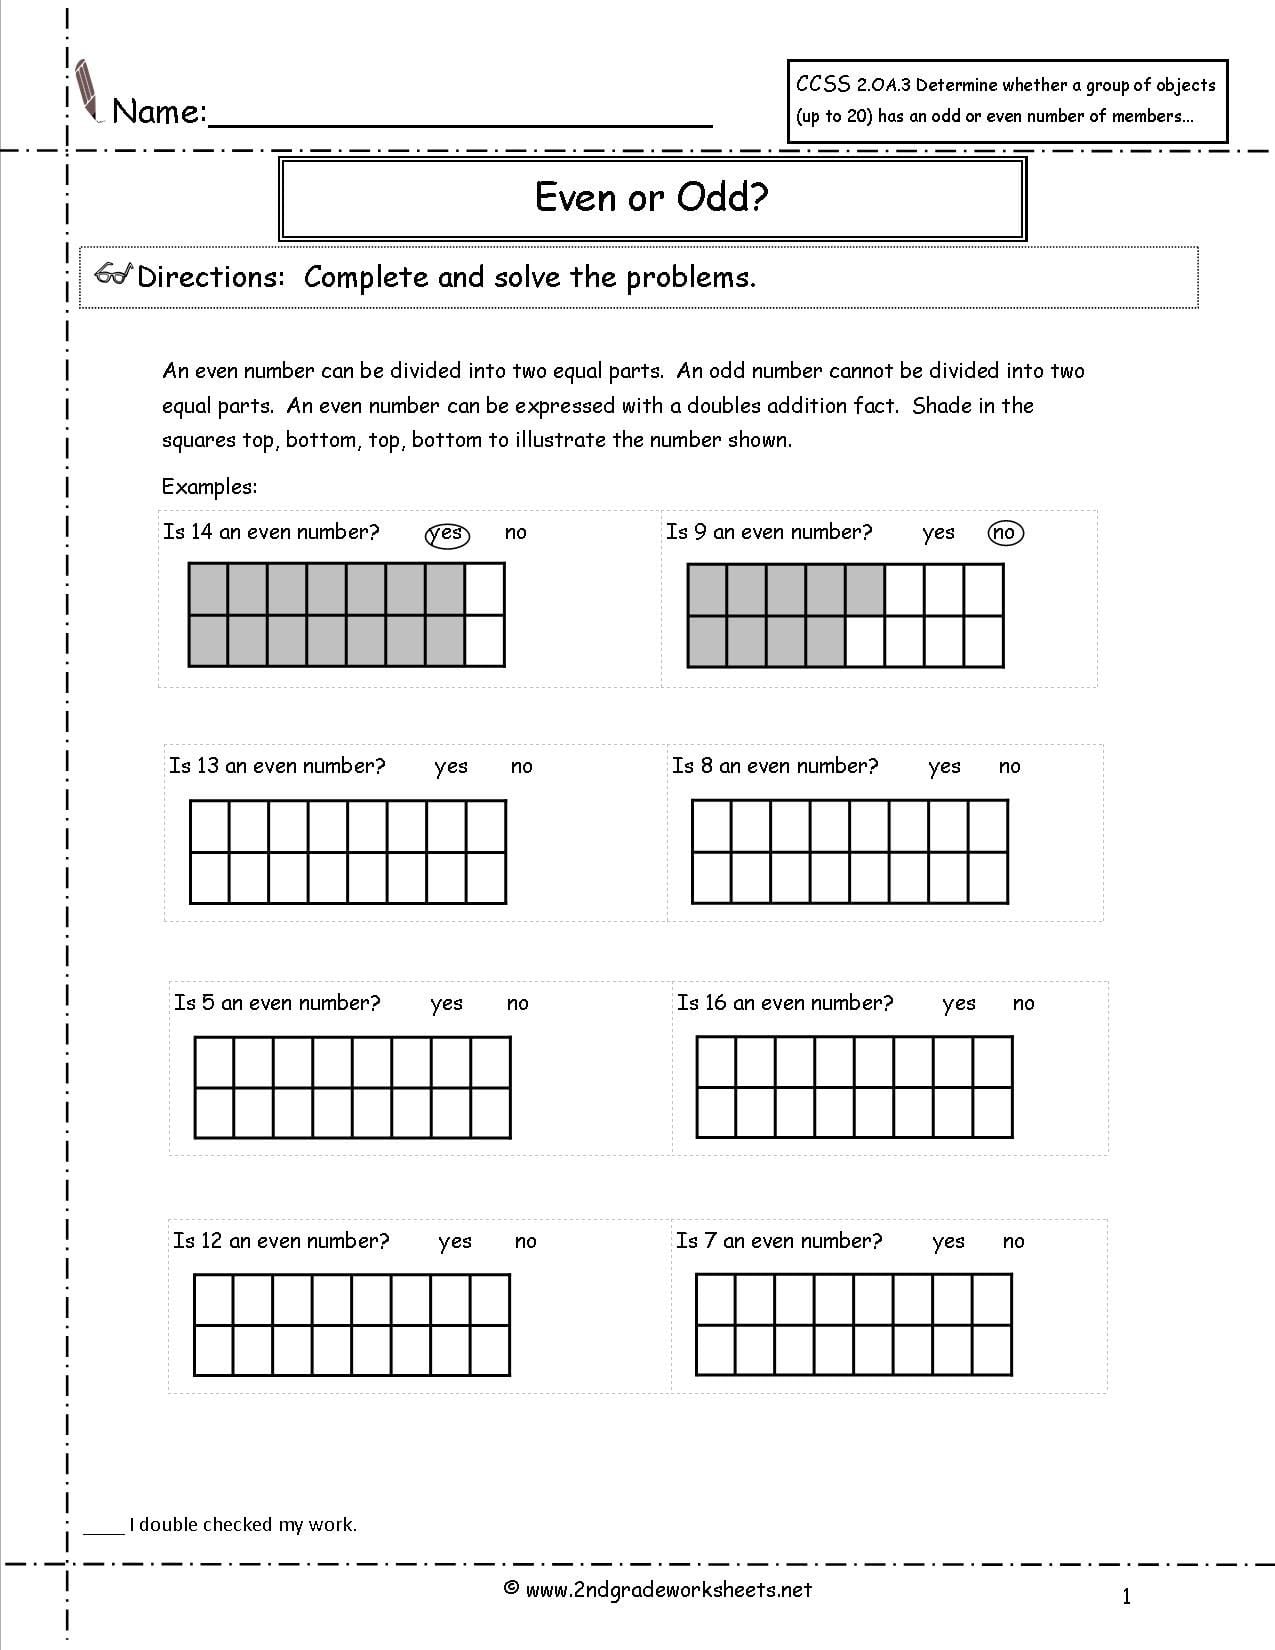 2Nd Grade Math Common Core State Standards Worksheets Along With 6Th Grade Common Core Worksheets